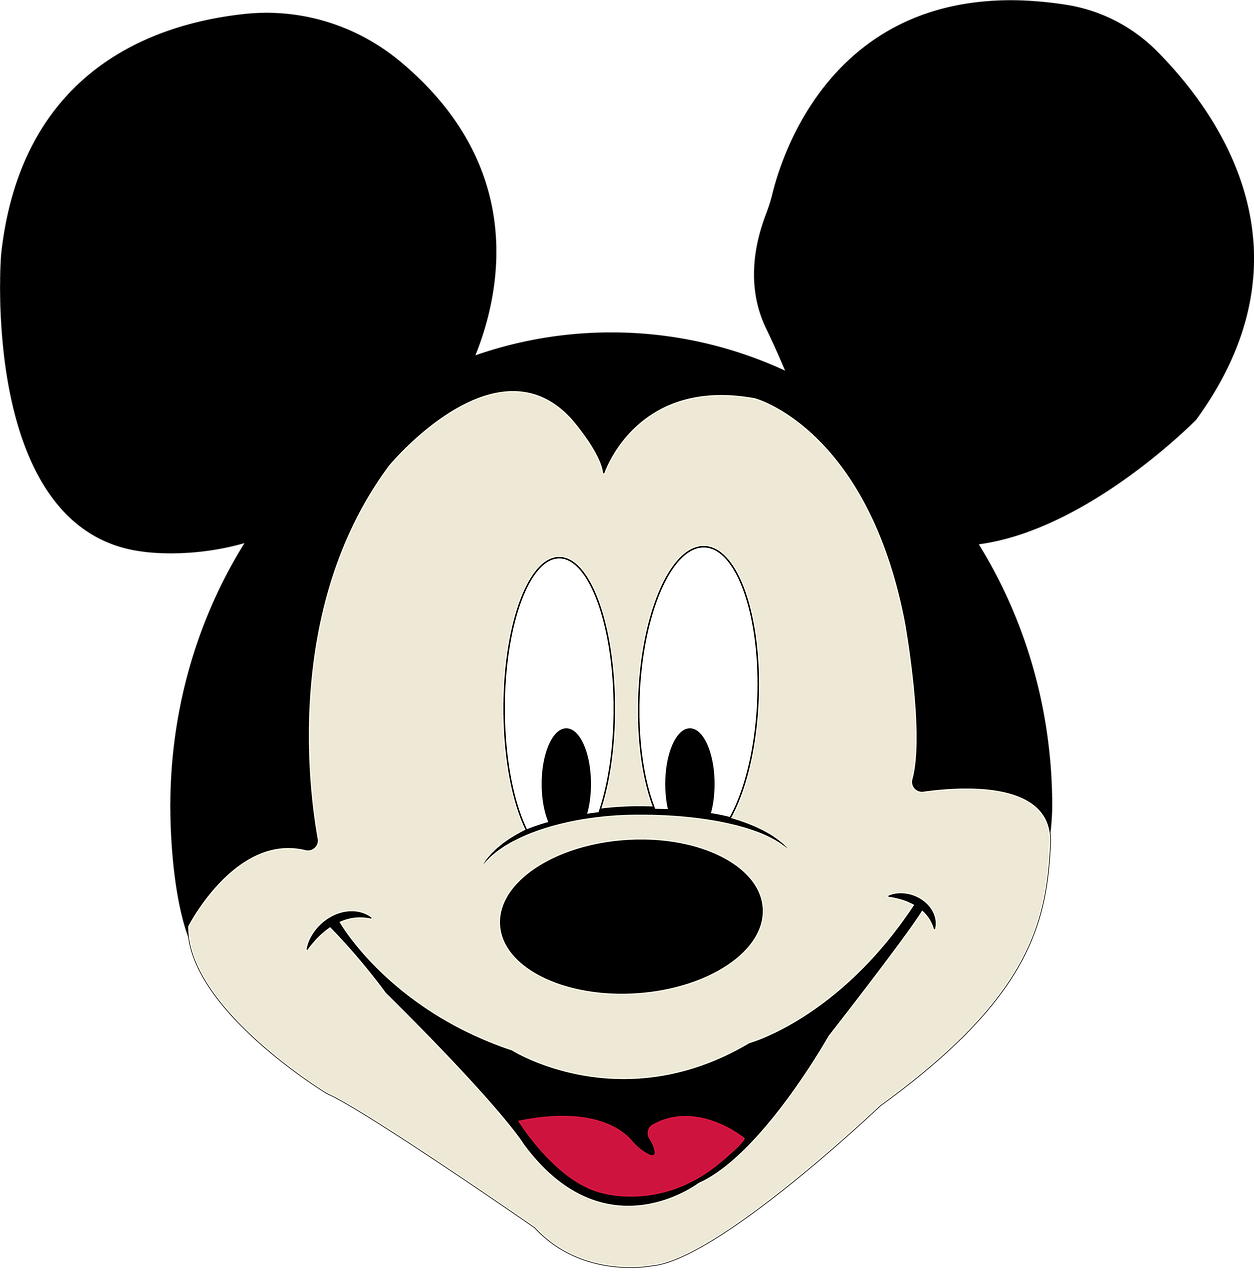 mickey-mouse-5156421_1280.png